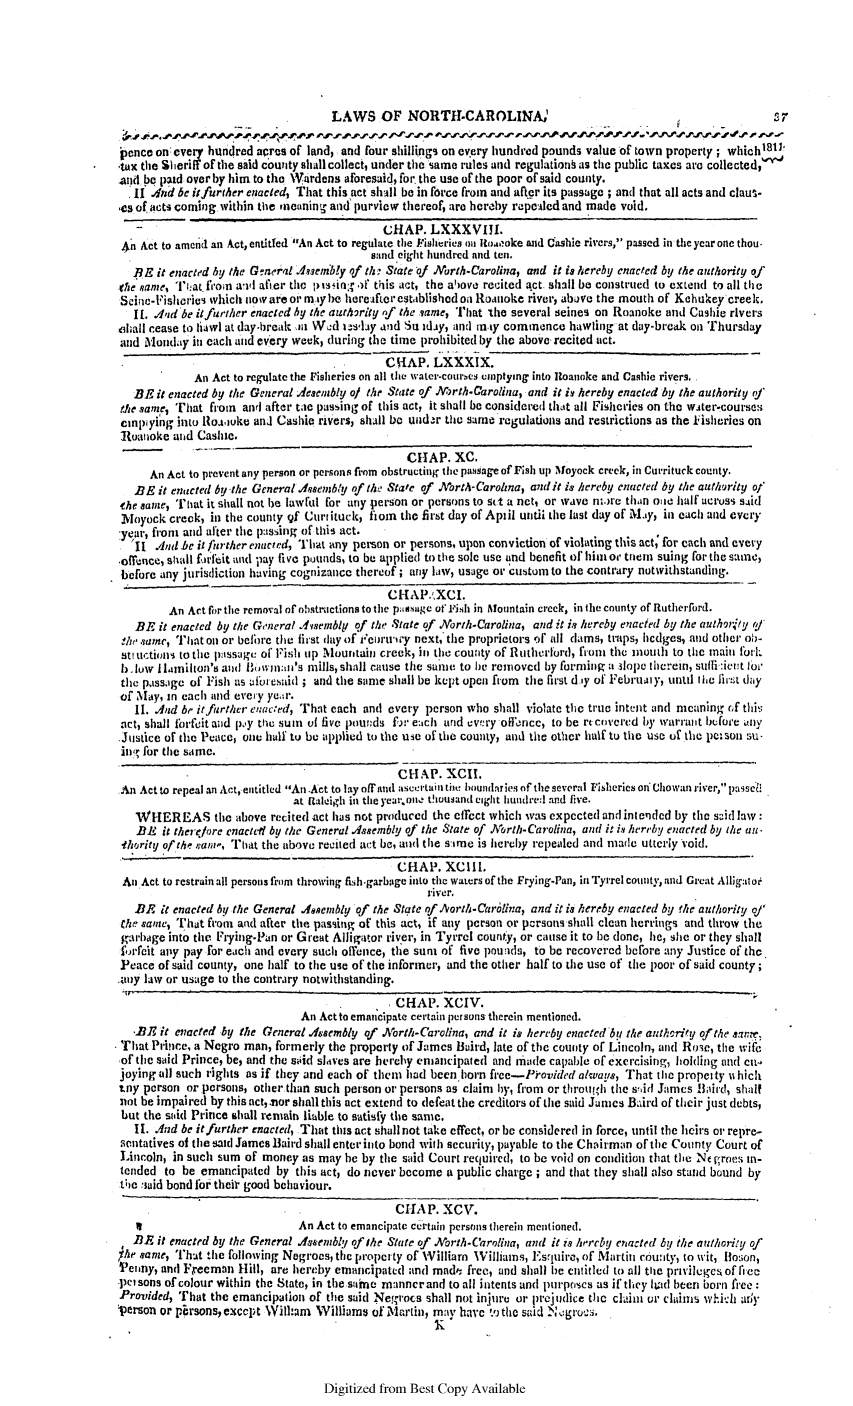 handle is hein.slavery/ssactsnc0019 and id is 1 raw text is: LAWS OF NORTl-CAROLINA,
pence on every hundred acres of land, and four shillings on every hundred pounds value of town property; whichi8m1
tax the Sheri of the siid county shall collect, under the same rules and regulationk as the public taxes are collected,(
.and be paid over by him to the Wardens aforesaid, for the use of the poor of said county.
'i1 4nd be itfurther enacted, That this act shall be in force from and after its passage ; and that all acts and claus-
es of acts coming within the neanin- and purview thereof, are hereby repealed and made void.
CHAP. LXXXVIll.
An Act to amend an Act, entitfed An Act to regulate the Fisheries o Ito.'ooke and Cashie rivers, passed in the ycar one thou.
sand eight hundred and ten.
BE it enacted by the General Asembly of th,- State of North-Carolina, and it is hereby enacted by the authority of
(he Name, That f*on awll after the pssng: .if this act, the ahove recited act shall be construed to extend to all the
Scine-Fishecries which now are oi' m ty be hereafter established oil Roanoke river, abave the mouth of Kehukey creek.
II. .dad be it further enacted by the autharity of the same, That the several seines on Roanoke and Cashie rivers
chall cease to liawl at day-break .n Wed us'1ay and Sn iday, and inty commence hawling at day-break on Thursday
and Mondaiy in each and every week, during the time prohibited by the above recited act.
CHAP. LXXXIX.
An Act to regulate the Fisheries on all the water-courbes emptying into Roanoke and Cashie rivers.
BE it enacted by the General Jesembly of the State of .Mrth-Carolina, and it is hereby enacted by the authority of'
die same, That friom and after tae passing of this act, it shall be considered that all Fisheries on the water-courses
cmnpiying into Rloaouke and Cashie rivers, shall be undar the same regulations and restrictions as the iisheries on
Roanoke aid Cashie.
CHAP. XC.
An Act to prevent any person or persons from obstructing the passage of Fish ui Noyock creek, in Currituck county.
BE it enacted by the General Adsembly of the State of orth-Carohna, and it is hereby enacted by the authority of
the same, T'hat it shall not be lawful for any person or persons to sct a net, or wave n)re than oace half across said
Mayock creek, in the county of Currituck, fon the first day of April until the last day of May, in each and every
year, froin and after the passing of this act.
rII And be it further enacted, That any person or persons, upon conviction of violating this act; for each and every
offence, shall forfeit and pay five pounds, to be applied to the sole use and benefit of him o triem suing for the same,
before any jurisdiction having cognizance thereof ; any law, usage or custom to the contrary notwithstanding.
CHAP.kXCI.
An Art for the removal of obstructions to the pasage of Fish in Mountain creek, in the county of Rutherford.
BE it enacted by the General Assembly of the State of North-Carolina, and it is hereby enacted by the authoruty (/
the sane, That on or belbre the first day of reuir'u-iy next, the proprietors oft all clams, traps, hcdges, and other ob-
St uctions to the  ssage of Fish up Mountain creek, in the county of Rutherford, fiont the mouth to the main fork
1)- low I lamilton's and Bhminn's mills, shall cause the sonic to be removed by forming a slope therein, suffi:ient foi'
the passage of Fish as aii esaid ; and the same shall be kept open from the first d-'y of Februamy, until the first day
of May, in each and every yer.
11. And be it further enacted, That each and every person who shall violate the true intent and meaning 6f this
act, shall forfeit and p'y the sum of five pounds f)r each und every offorcc, to be rt covered by warrant before any
Justice of the Peace, one half to be applied to the use of tle county, and the other half to the use of the peSol su-
iin for the same.
CHAP. XCII.
An Act to repeal an Act, entitled An.Act to lay off'and ascertail tit! boundaries of the several Fisheries ori Chowan river, passe8
at Raleigh in the year.one thousand eight hundre:d and five.
WHEREAS the above recited act has not produced the effect which was expected and intended by the said law:
BE it there/ore enactedi by the General Assembly of the State of North-Carolina, and it is hereby enacted by the au-
-thority of the ran-, That the above recited act be, and the sirue is hereby repealed and made utterly void.
CHAP. XCIII.
Ani Act to restrain all persons from throwing fish-garbage into the waters of the Frying-Pan, in Tyrrel county, and Great Alligatoe
river.
BE it enacted by the General Aenembly of the State ofhNorth-Carolina, and it is hereby enacted by the authority of
the saie, That from and after the passing of this act, if any person or persons shall clean herrings and throw the
garbage into the Frying-Pan or Great Alligator river, in Tyrrel county, or cause it to be done, he, she or they shall
forfeit any pay for each and every such offence, the sun of five pounids, to be recovered before any Justice of the.
Peace of said county, one half to the use of the informer, and the other half to the use of the poor of said county;
any law or usage to the contrary notwithstanding.
ACHAP. XCIV.
An Actto emancipate certain persons therein mentioned.
-BE it enacted by the General Assembly of North-Carolina, and it is hereby enacted by the authority of the sa.e,
That Prince, a Negro man, formerly the property of James Baird, late of the county of Lincoln, and Rose, the wife
of the said Prince, be, and the sAid slaves are hercrhy emancipated and rninde capable of exercising, holding and ca.l
joying all such rights as if they and each of them had been horn ft'ee-P'ovided always, That the propecty w hich
tay person or persons, other than such person or persons as claim by, fiom or through the s'id James Bird, shalt
not be impaired by thisnct,aor shall this act extend to defeat the creditors of the said Jumes Baird of their just debts,
but the siid Prince shall remain liable to satisfy the sane.
I[. And be itfurther enacted, That this act shall not take effect, or be considered in force, until the heirs eor repre-
aentatives of the said James Baird shall enter into bond with security, payable to the Chairman of the County Court of
Lincoln, in such sum of money as may be by the said Court required, to be void on coluition that the Ne groes t-
tended to be emancipated by this act, do never become a public charge; and that they shall also stand bound by
tice said bond for thei' good behaviour.
CHAP. XCV.
I                         An Act to emancipate certain persons therein mentioned.
BE it enacted by the General .Asenbll o the State of North.Carolina, and it is herchy enacted bU the authority of
the/ same, That the following Negroes, the property of William Williams, Esquire, of Martii county, to wit, Ilo:;on,
Penny, and Freeman Hill, are hereby emancipated and mada free, and shall be entitled to all the privileges of rlec
pet sons of colour within the State, in the surne manner and to all intents and purposes as if they ltad been born free:
Provided, That the emancipation of the said Negroes shall not injure or prejudice the clain or claims which al'
person or ptrsons,exccpt Wilham Williams of Ma'tiin, mnay have tithe said Negrota.

Digitized from Best Copy Available


